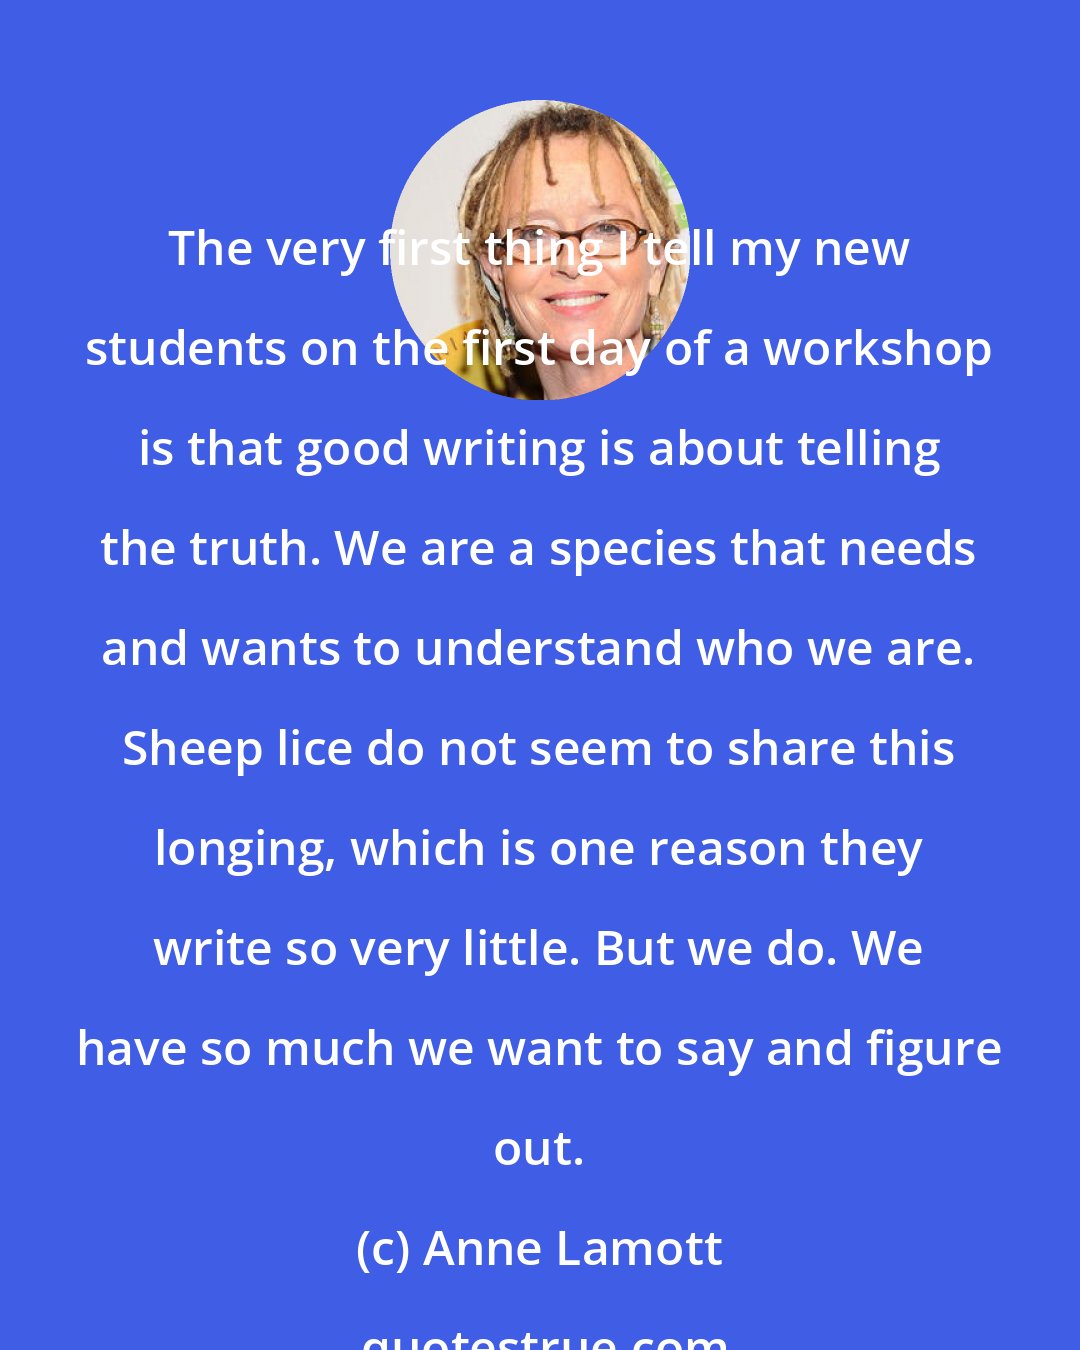 Anne Lamott: The very first thing I tell my new students on the first day of a workshop is that good writing is about telling the truth. We are a species that needs and wants to understand who we are. Sheep lice do not seem to share this longing, which is one reason they write so very little. But we do. We have so much we want to say and figure out.